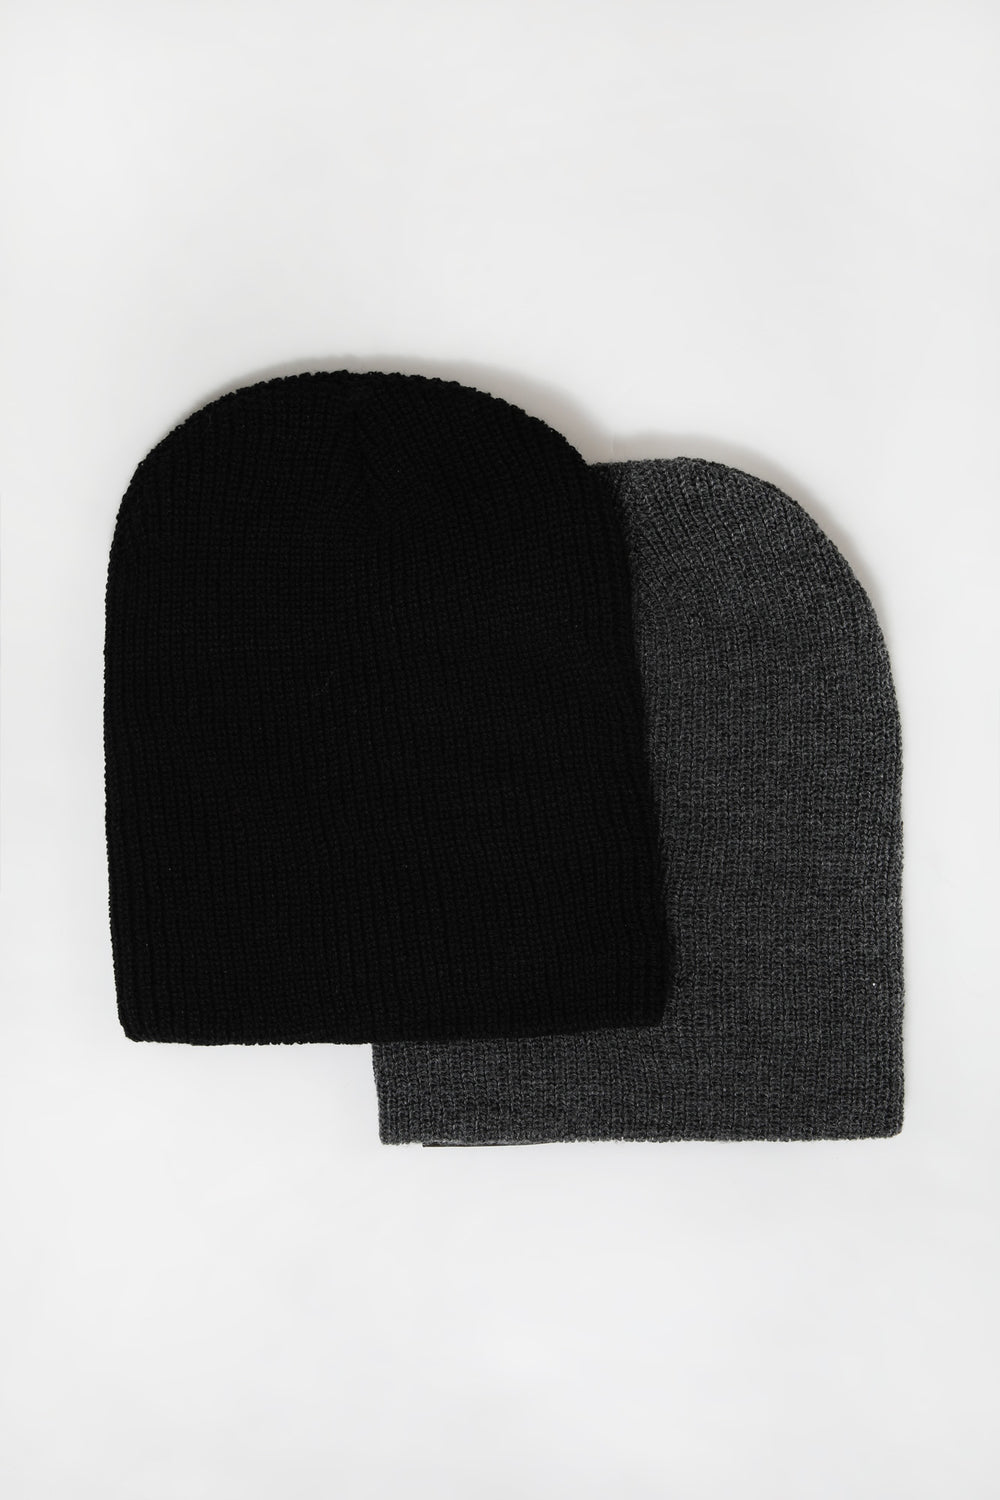 2 Tuques Style Slouchy Zoo York Homme Gris Noir